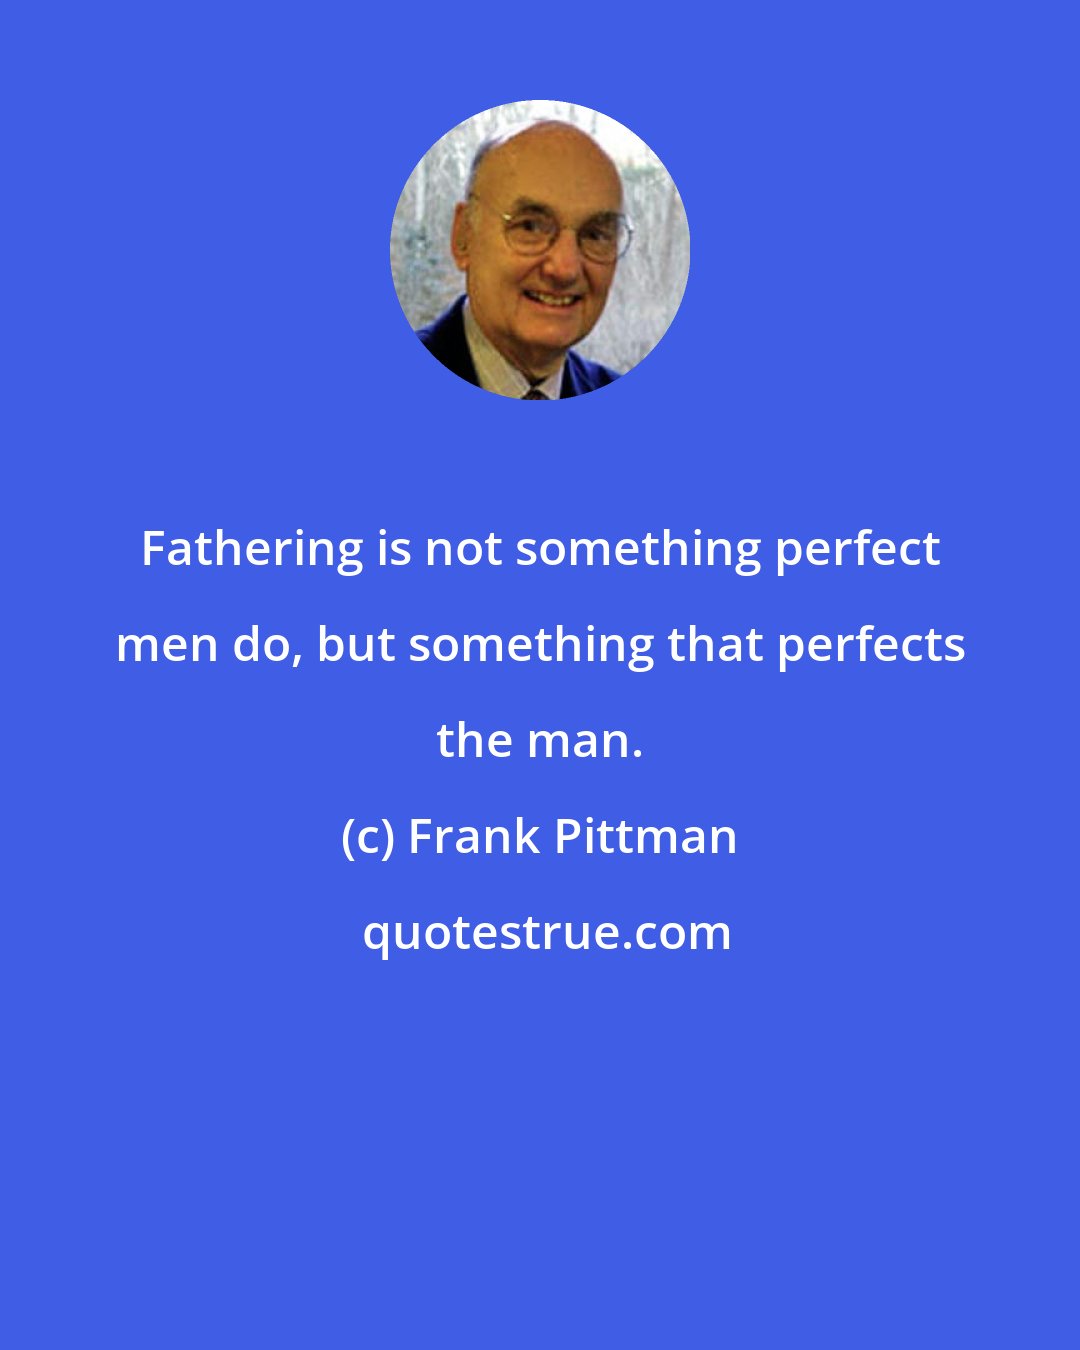 Frank Pittman: Fathering is not something perfect men do, but something that perfects the man.